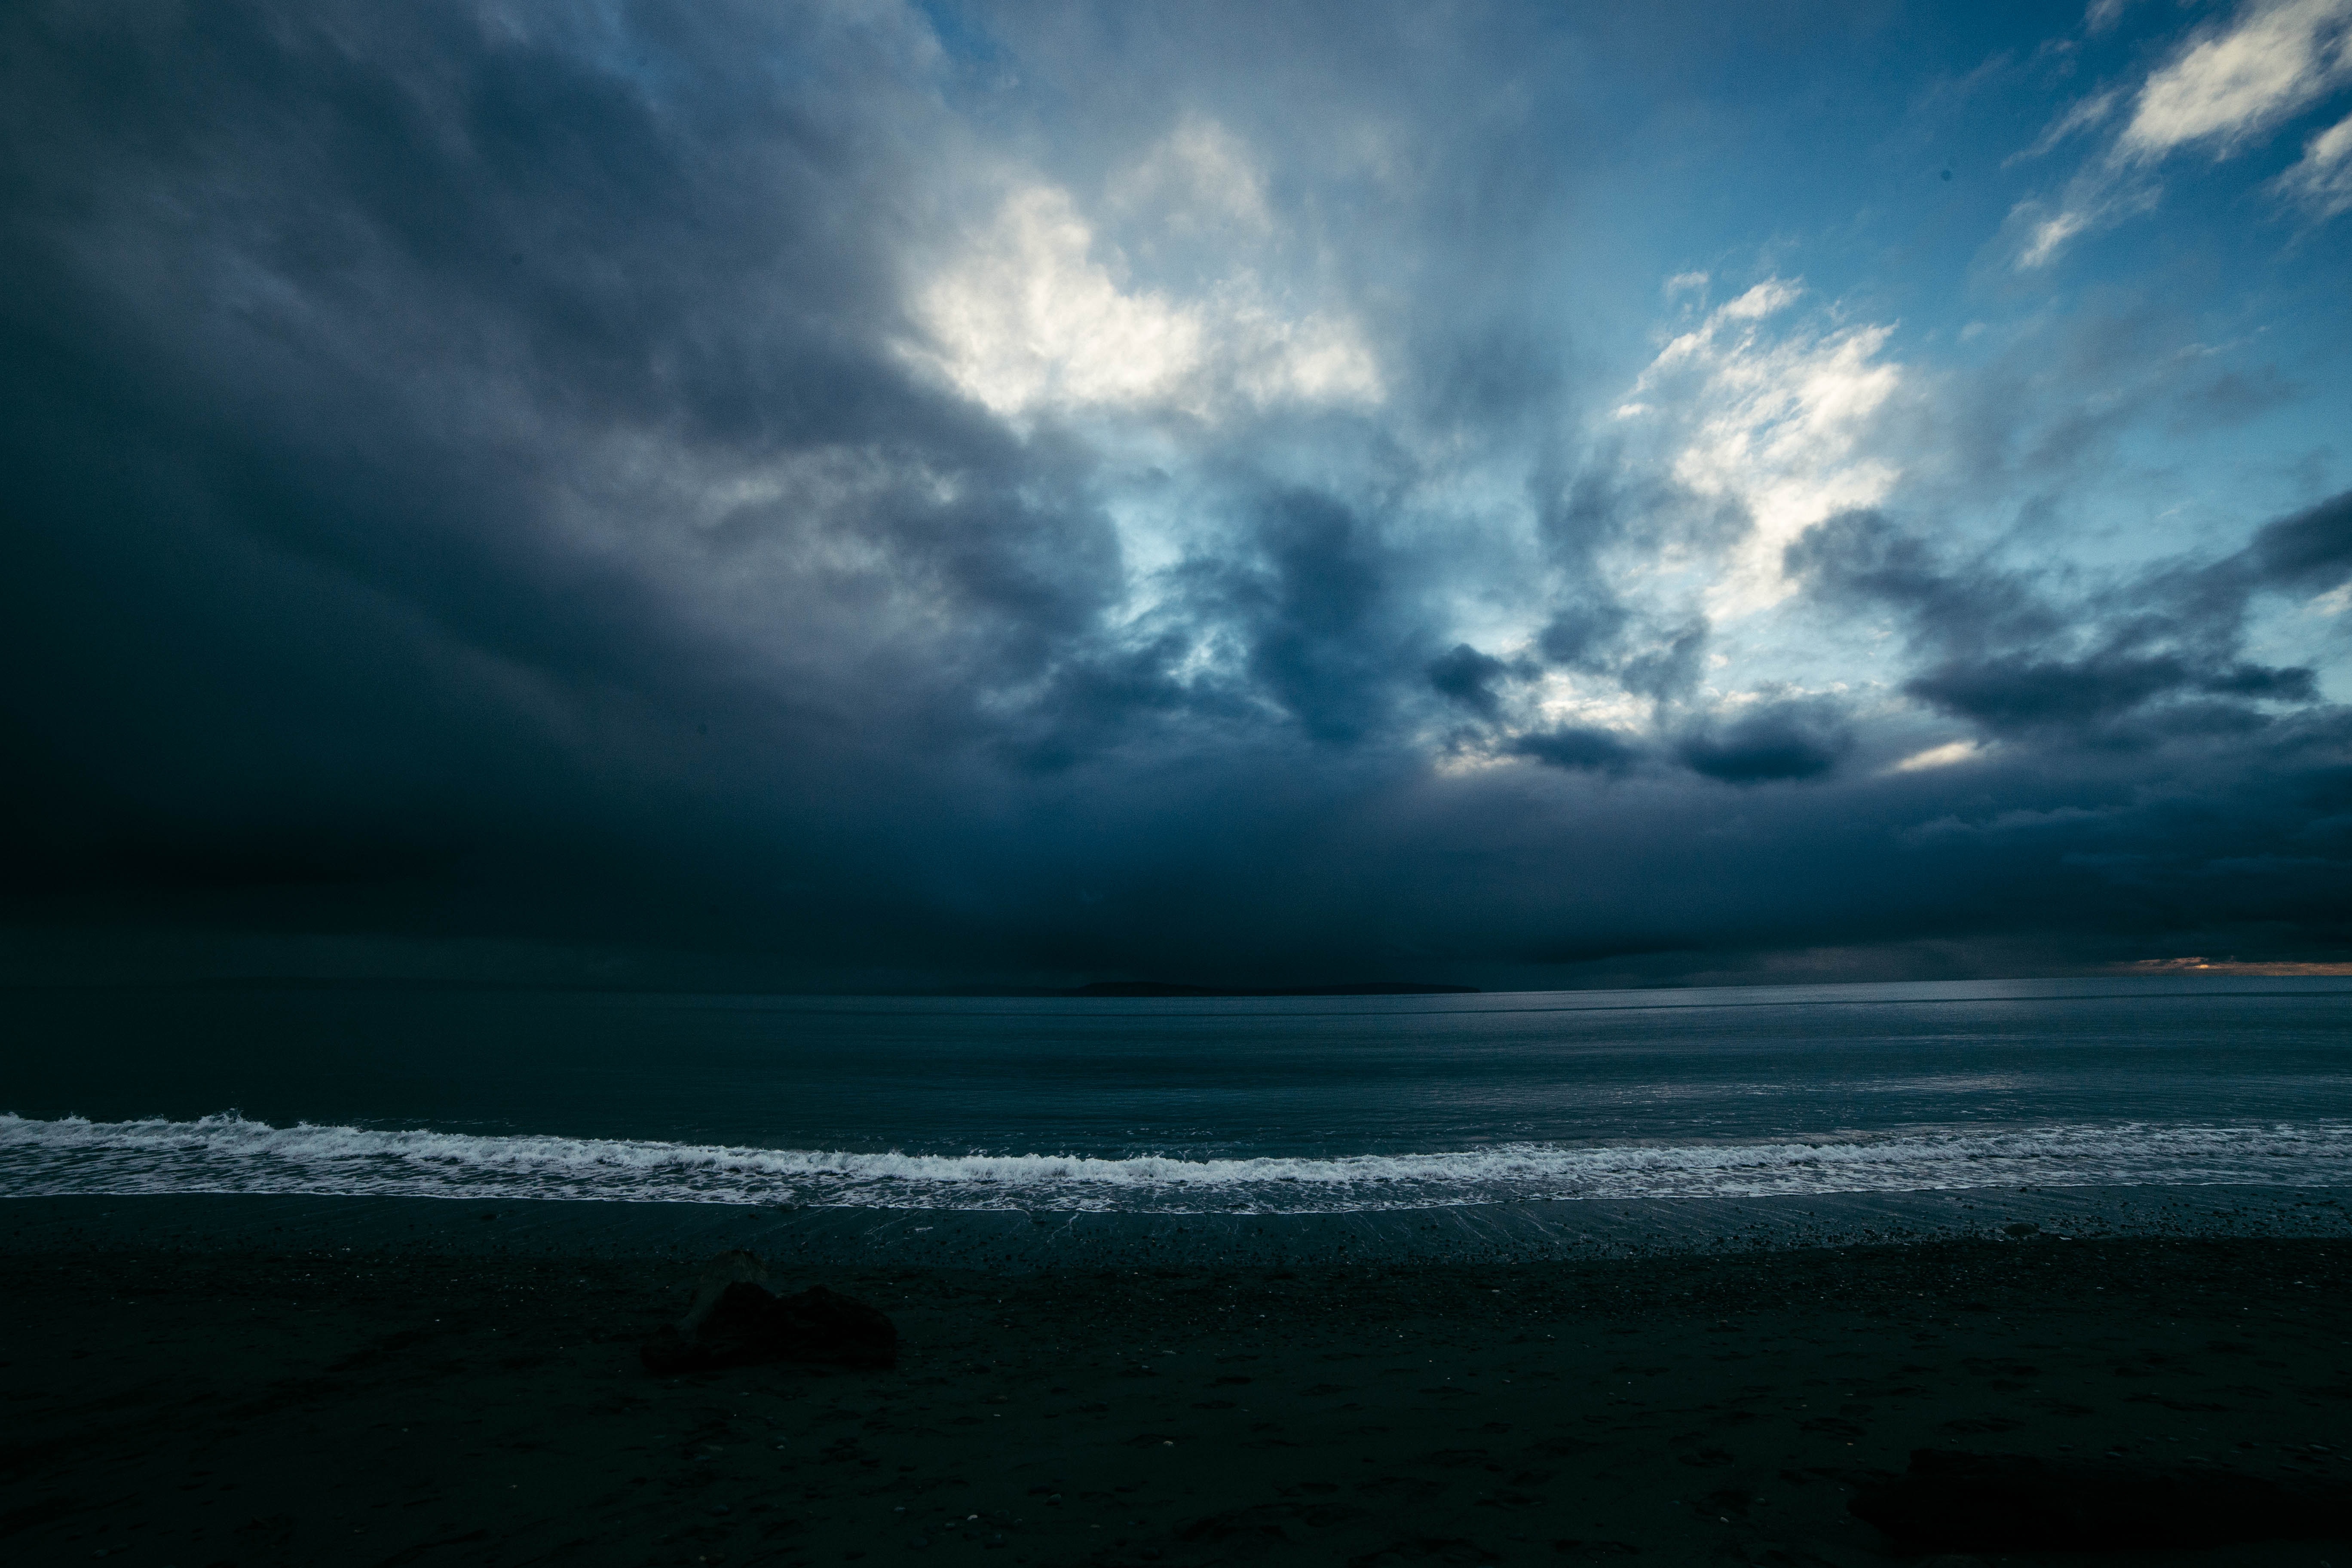 mainly cloudy, overcast, sea, nature, night, shore, bank, surf